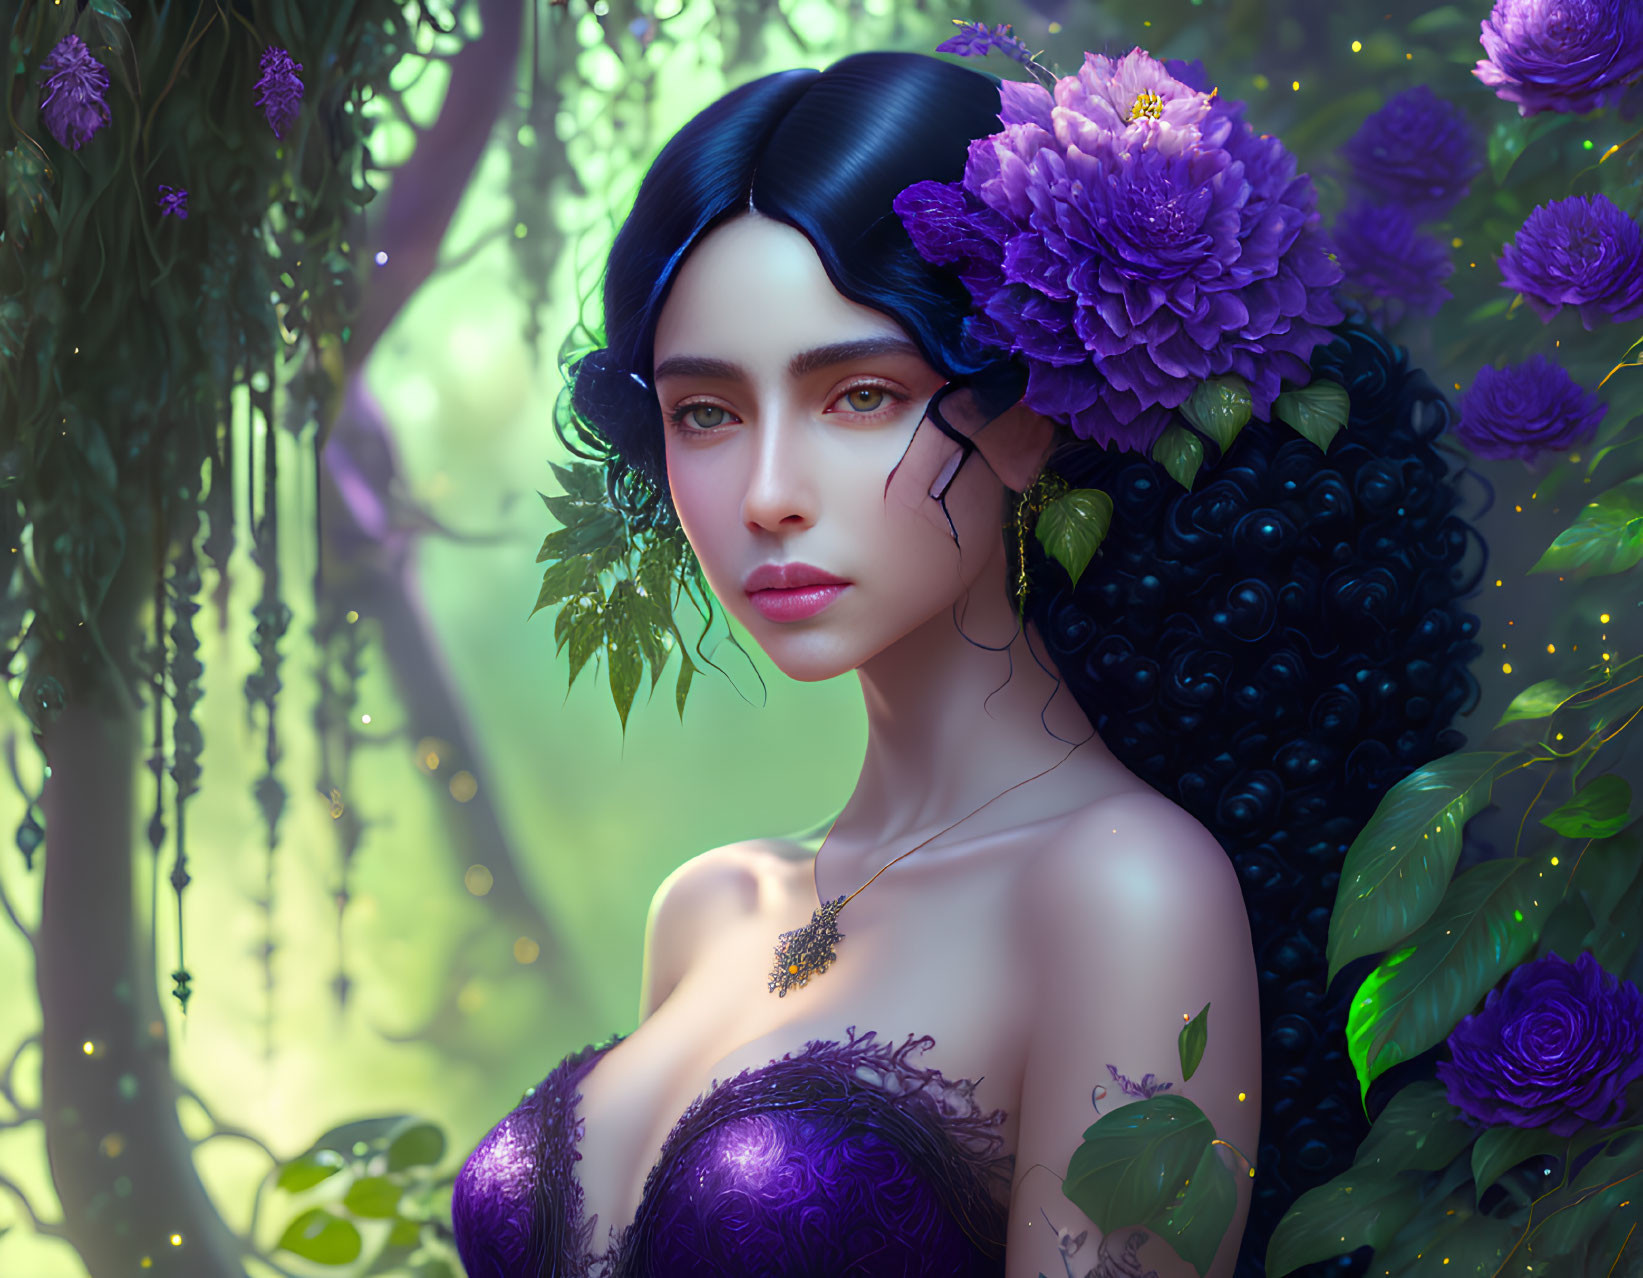 Dark-haired woman with purple flowers in ethereal forest setting